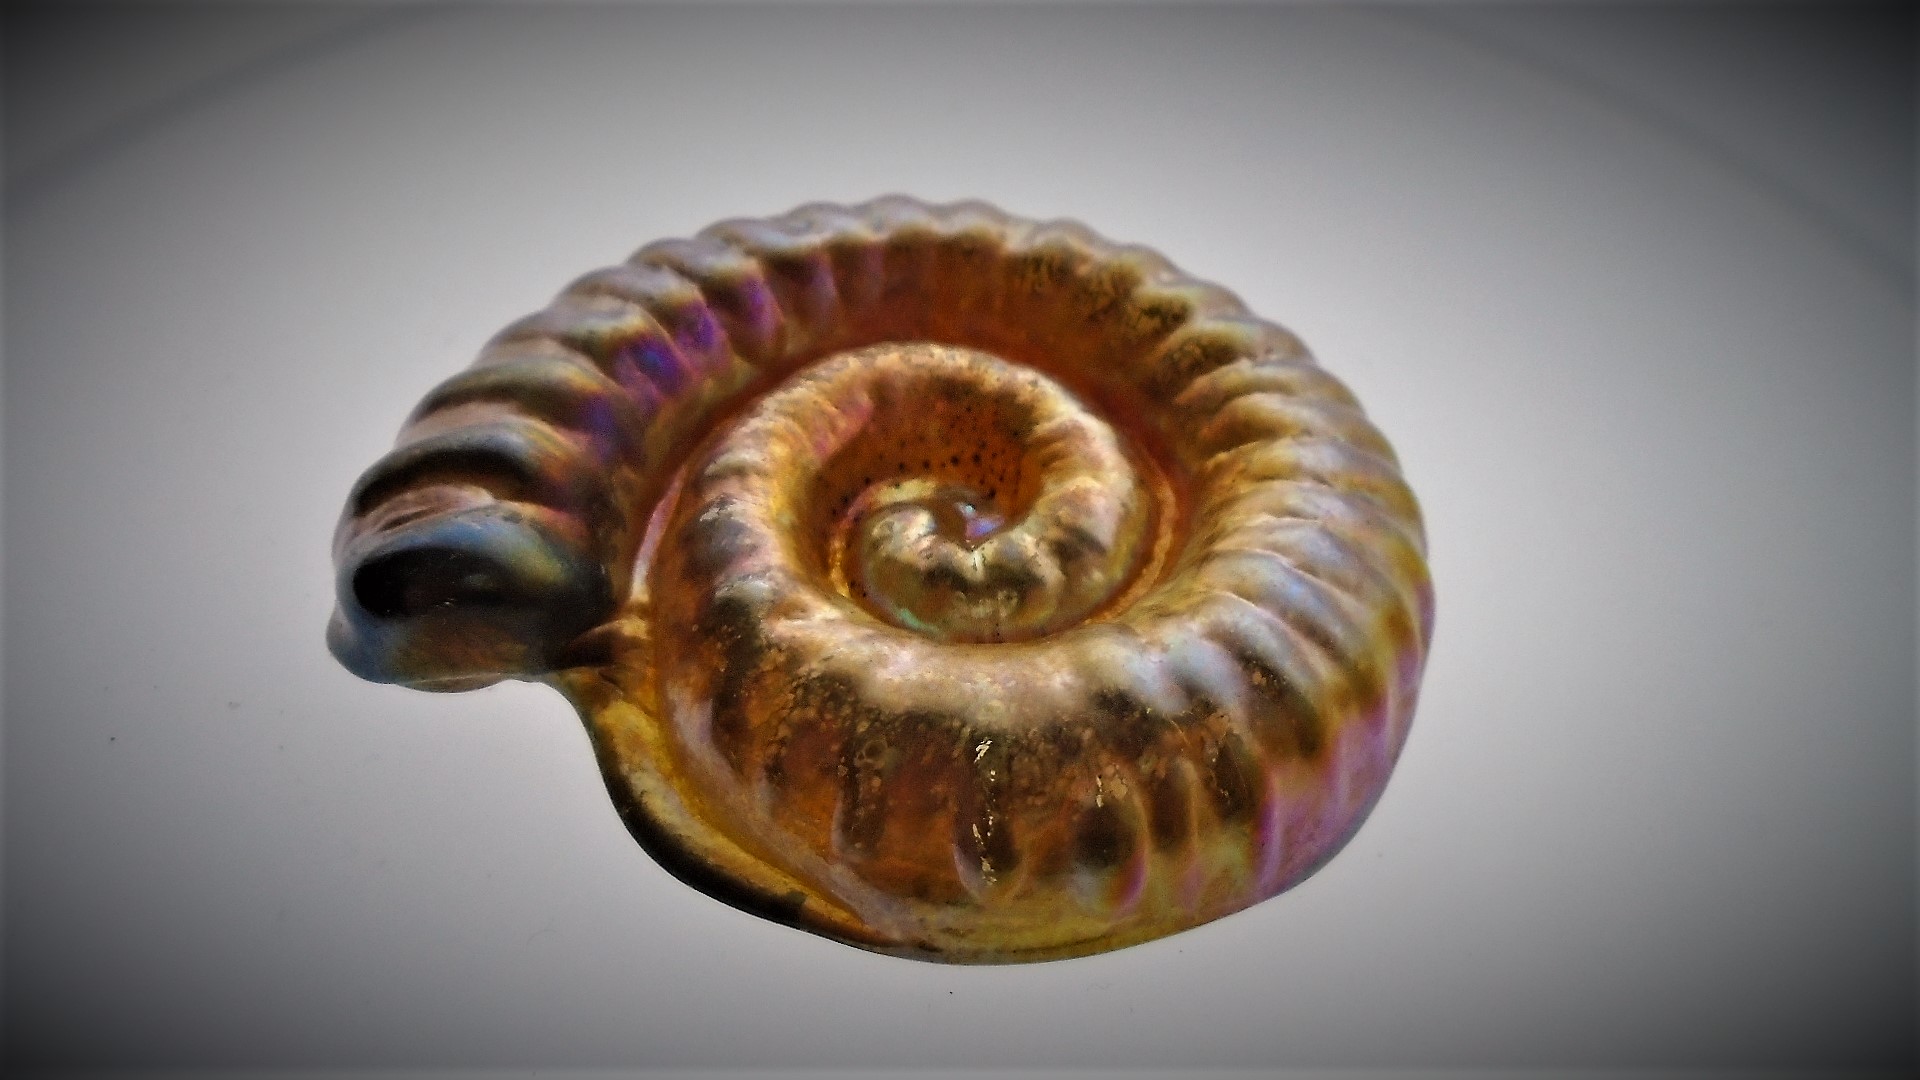  Isle of Wight Glass “Ammonite” paperweight  from the Mid 90s “Fish and Shells” Collection.